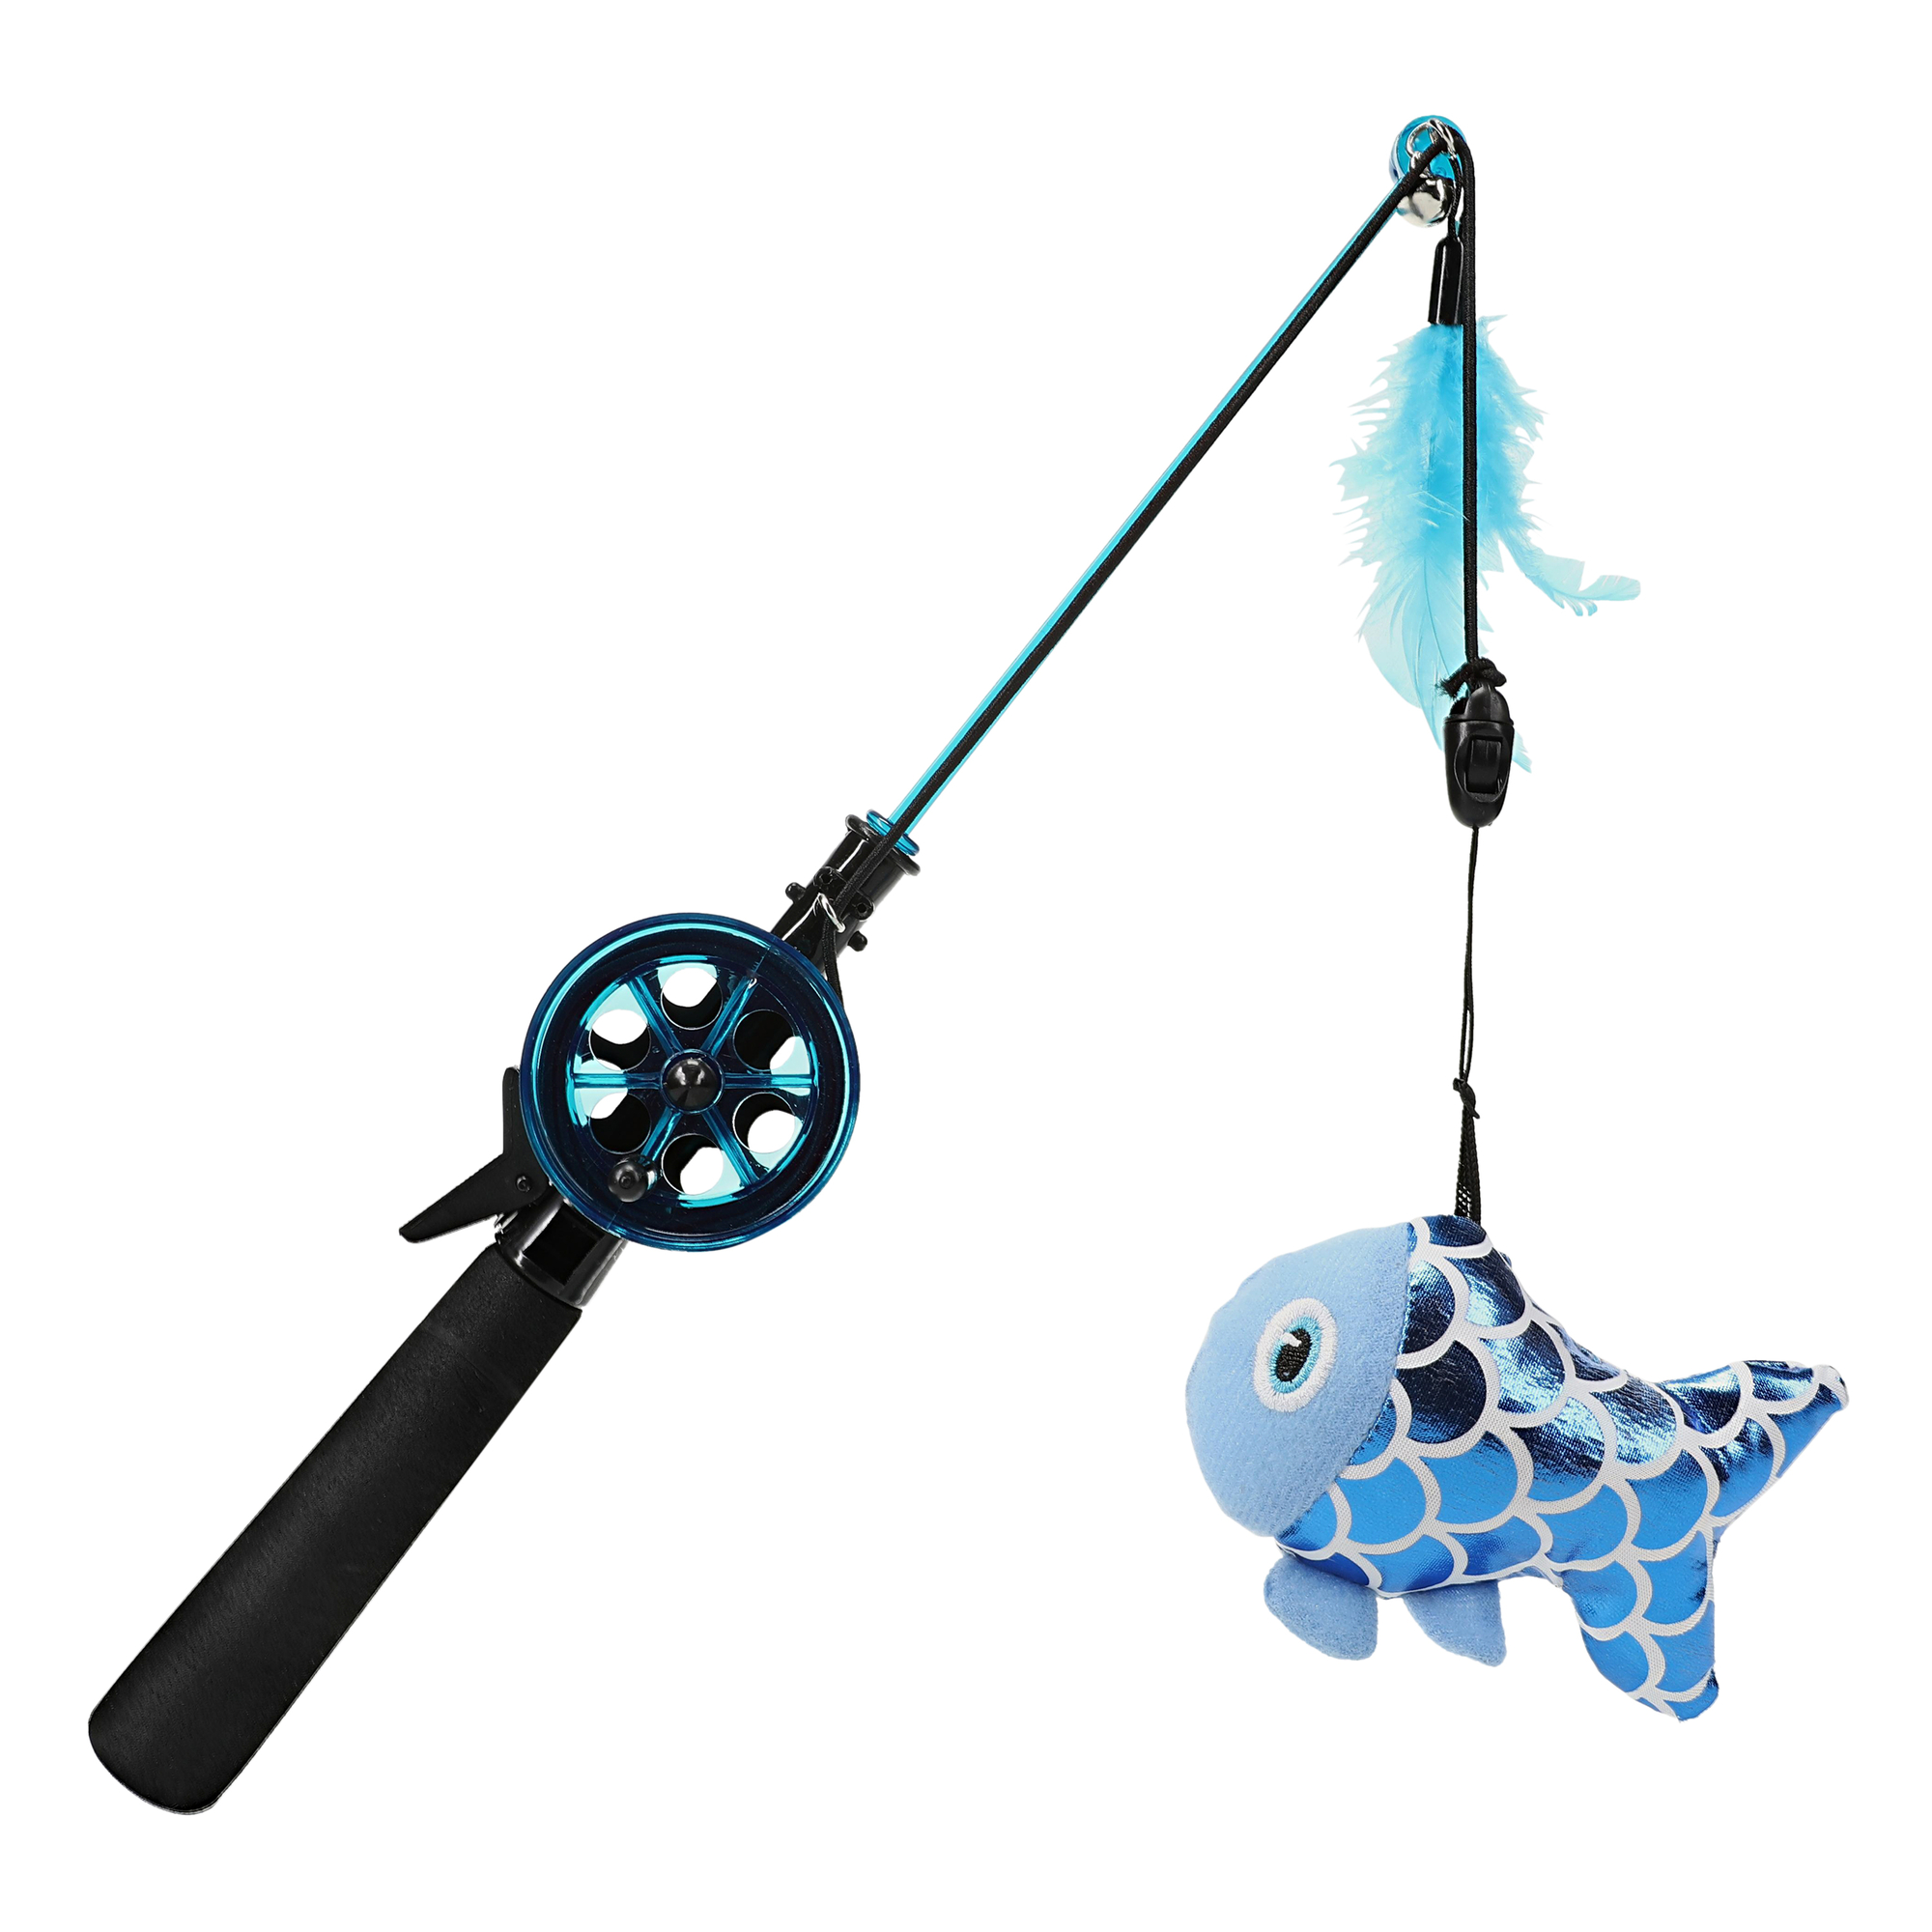  Cat Caster Fishing Pole Toy